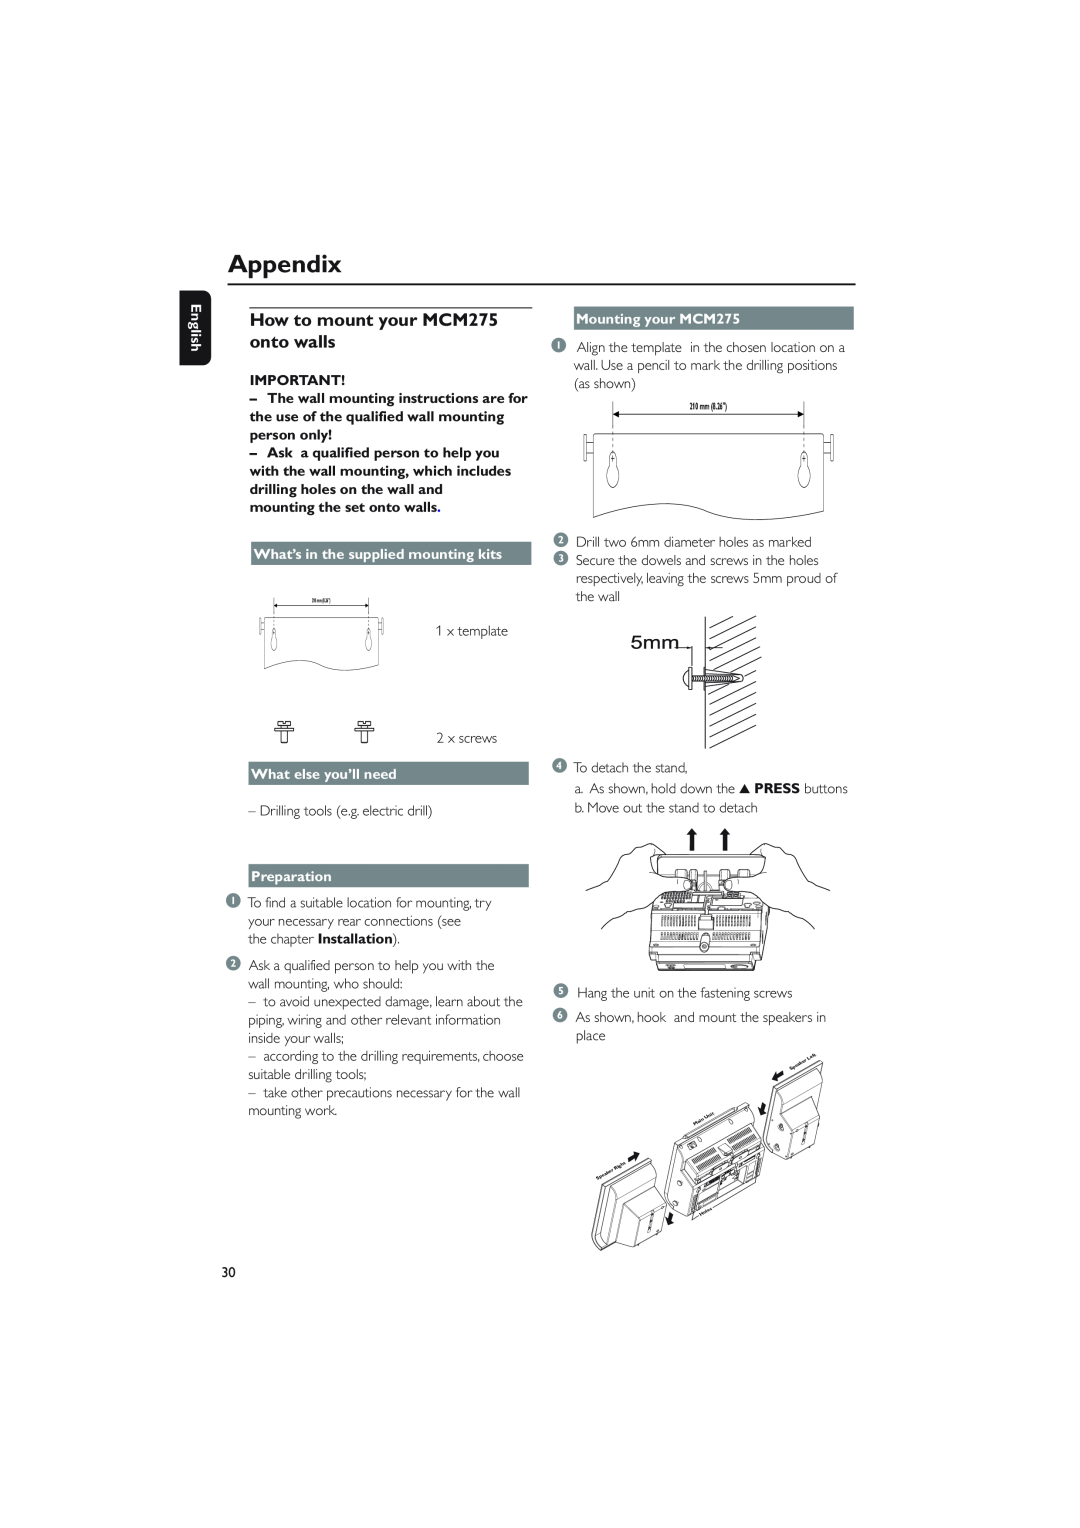 Philips MCM275 owner manual Appendix, English, What’s in the supplied mounting kits, What else you’ll need, Preparation 